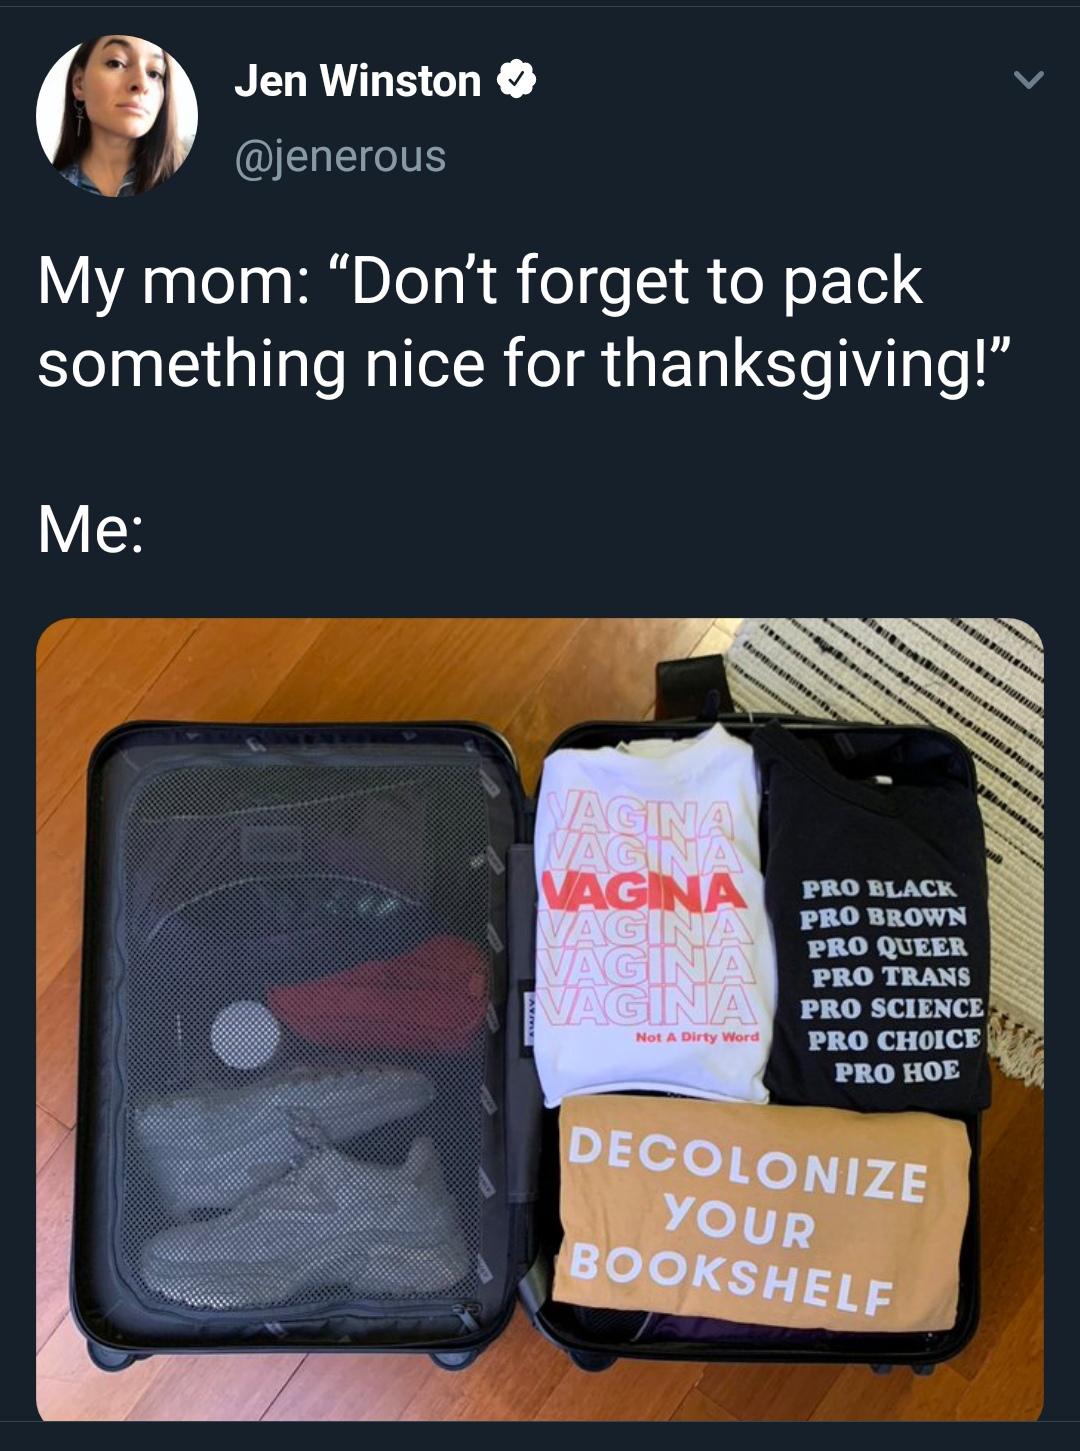 Jen Winston My mom Don't forget to pack something nice for thanksgiving! Me Obrobb Vagna Vagina Vagina Vagina Vagina Pro Black Pro Brown Pro Queer Pro Trans Pro Science Pro Choice Pro Hoe Not A Dirty Word Decolonize Your Bookshelf